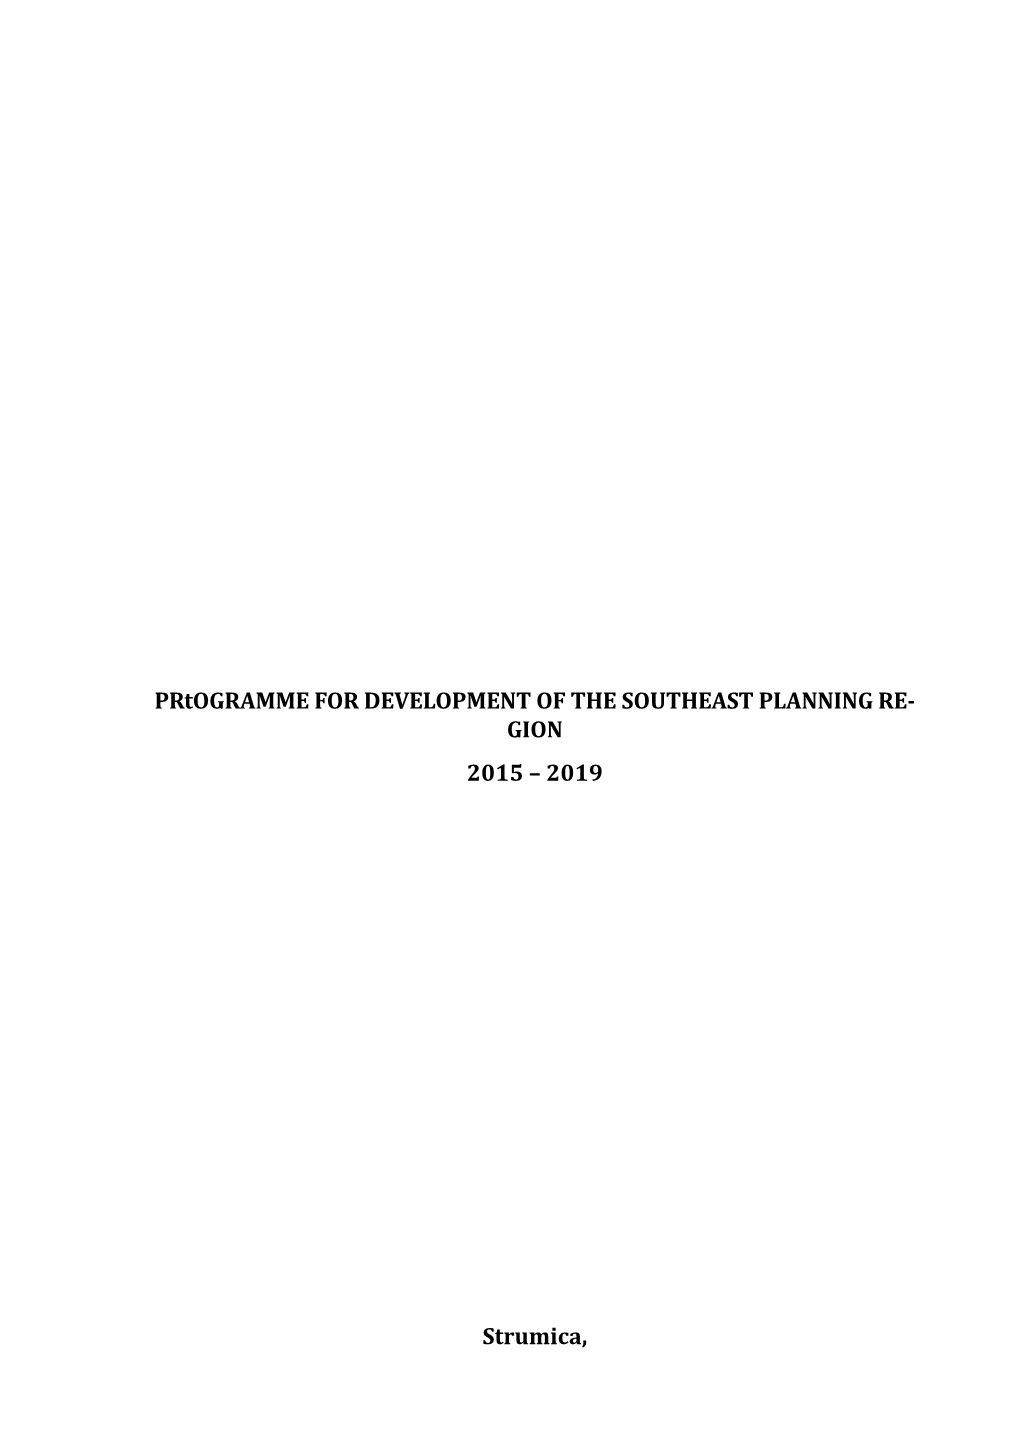 Programme for Development of the South-East Planning Region 2015